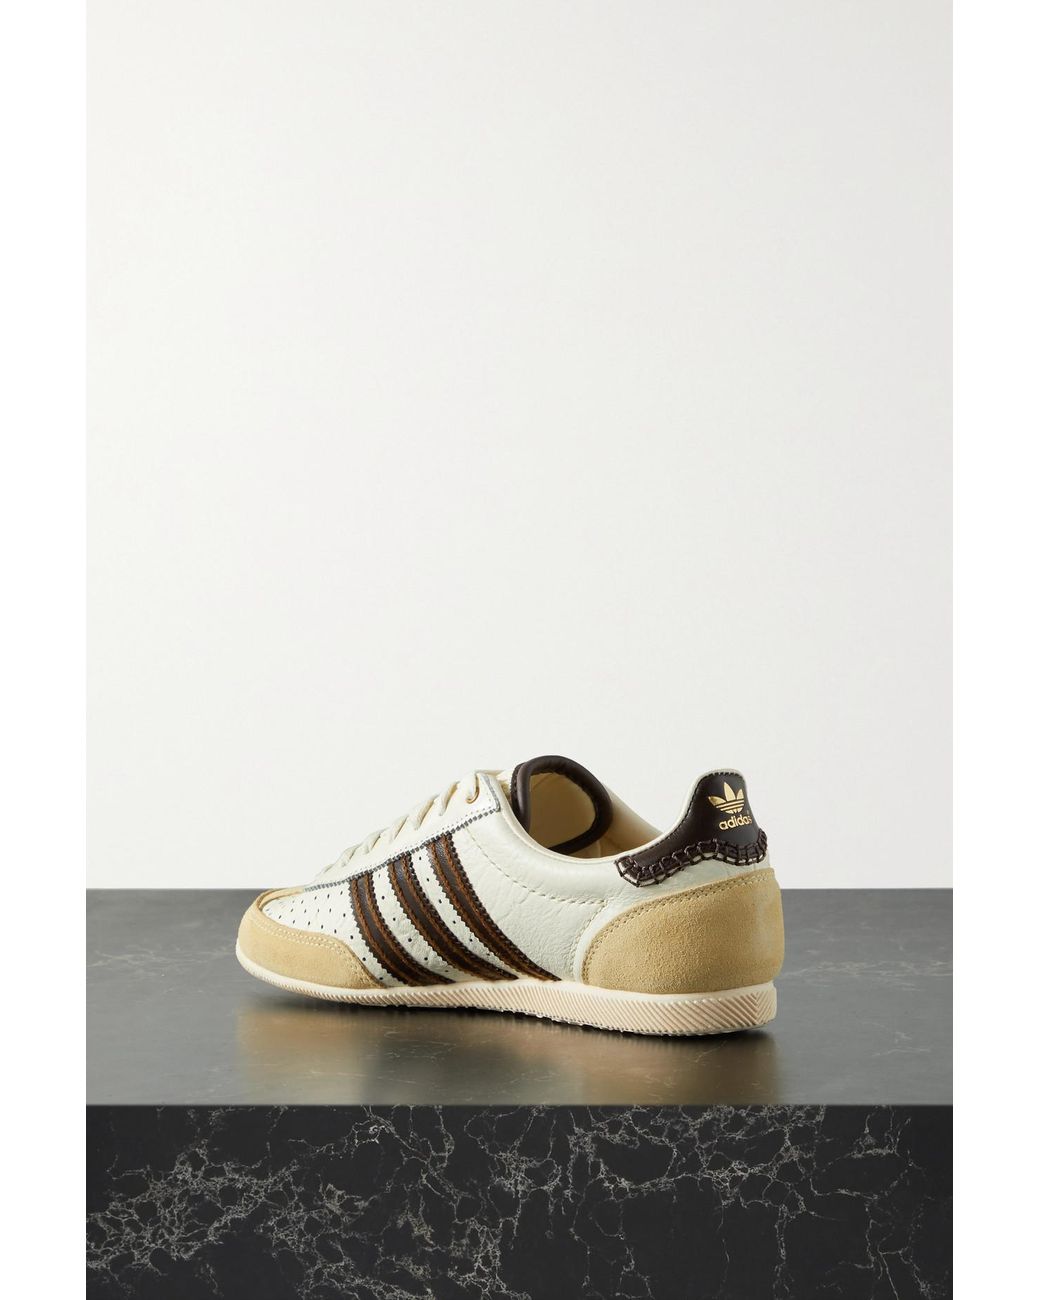 adidas Originals + Wales Bonner Japan Suede-trimmed Leather Sneakers in  White | Lyst